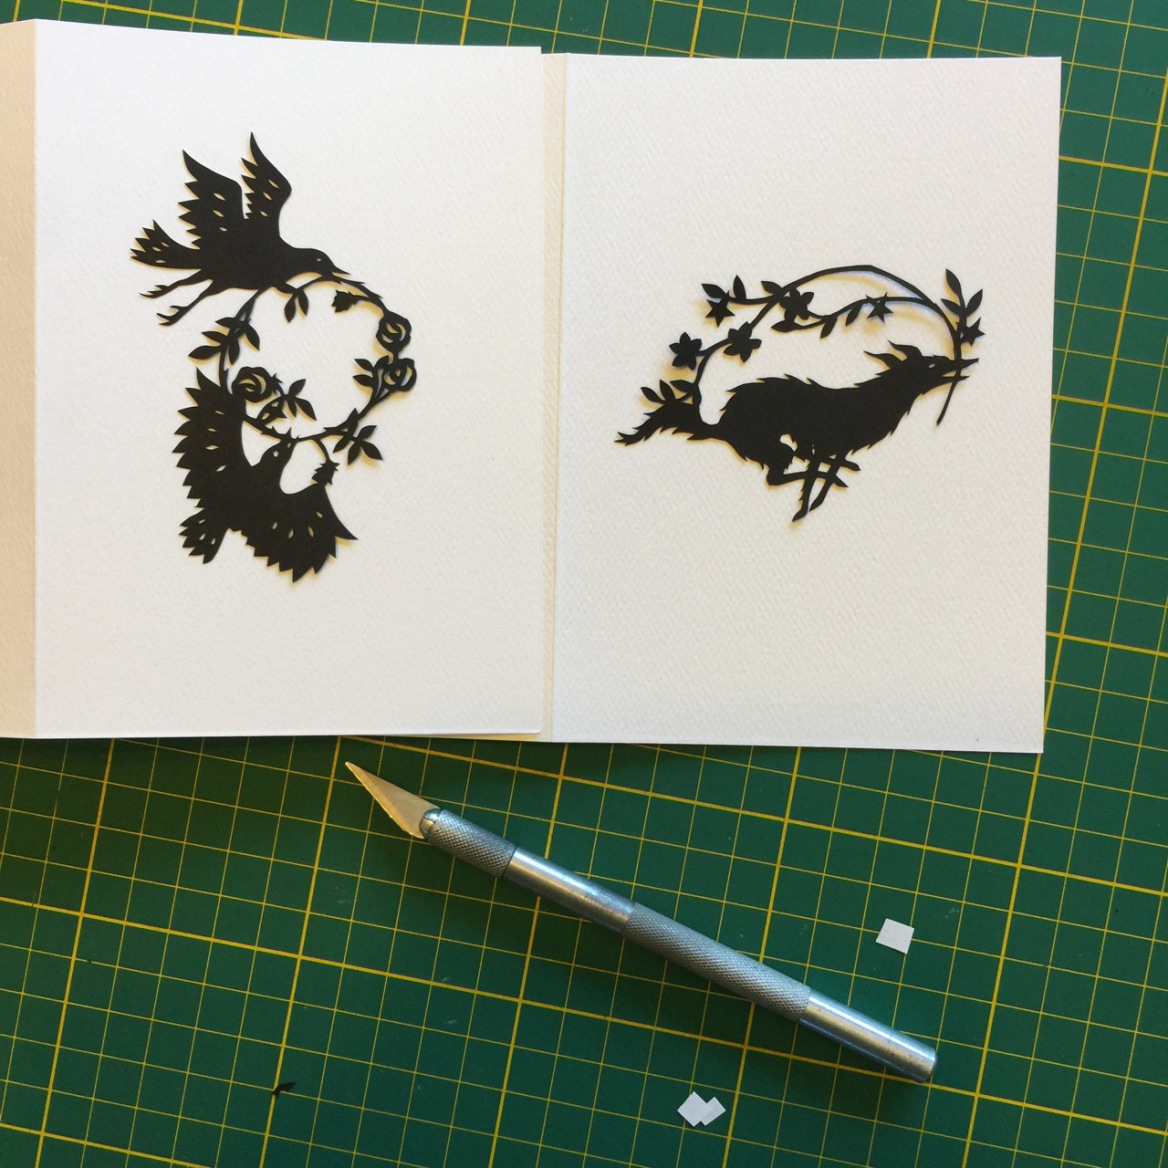 An open sketchbook featuring black cut-outs of birds and wolves